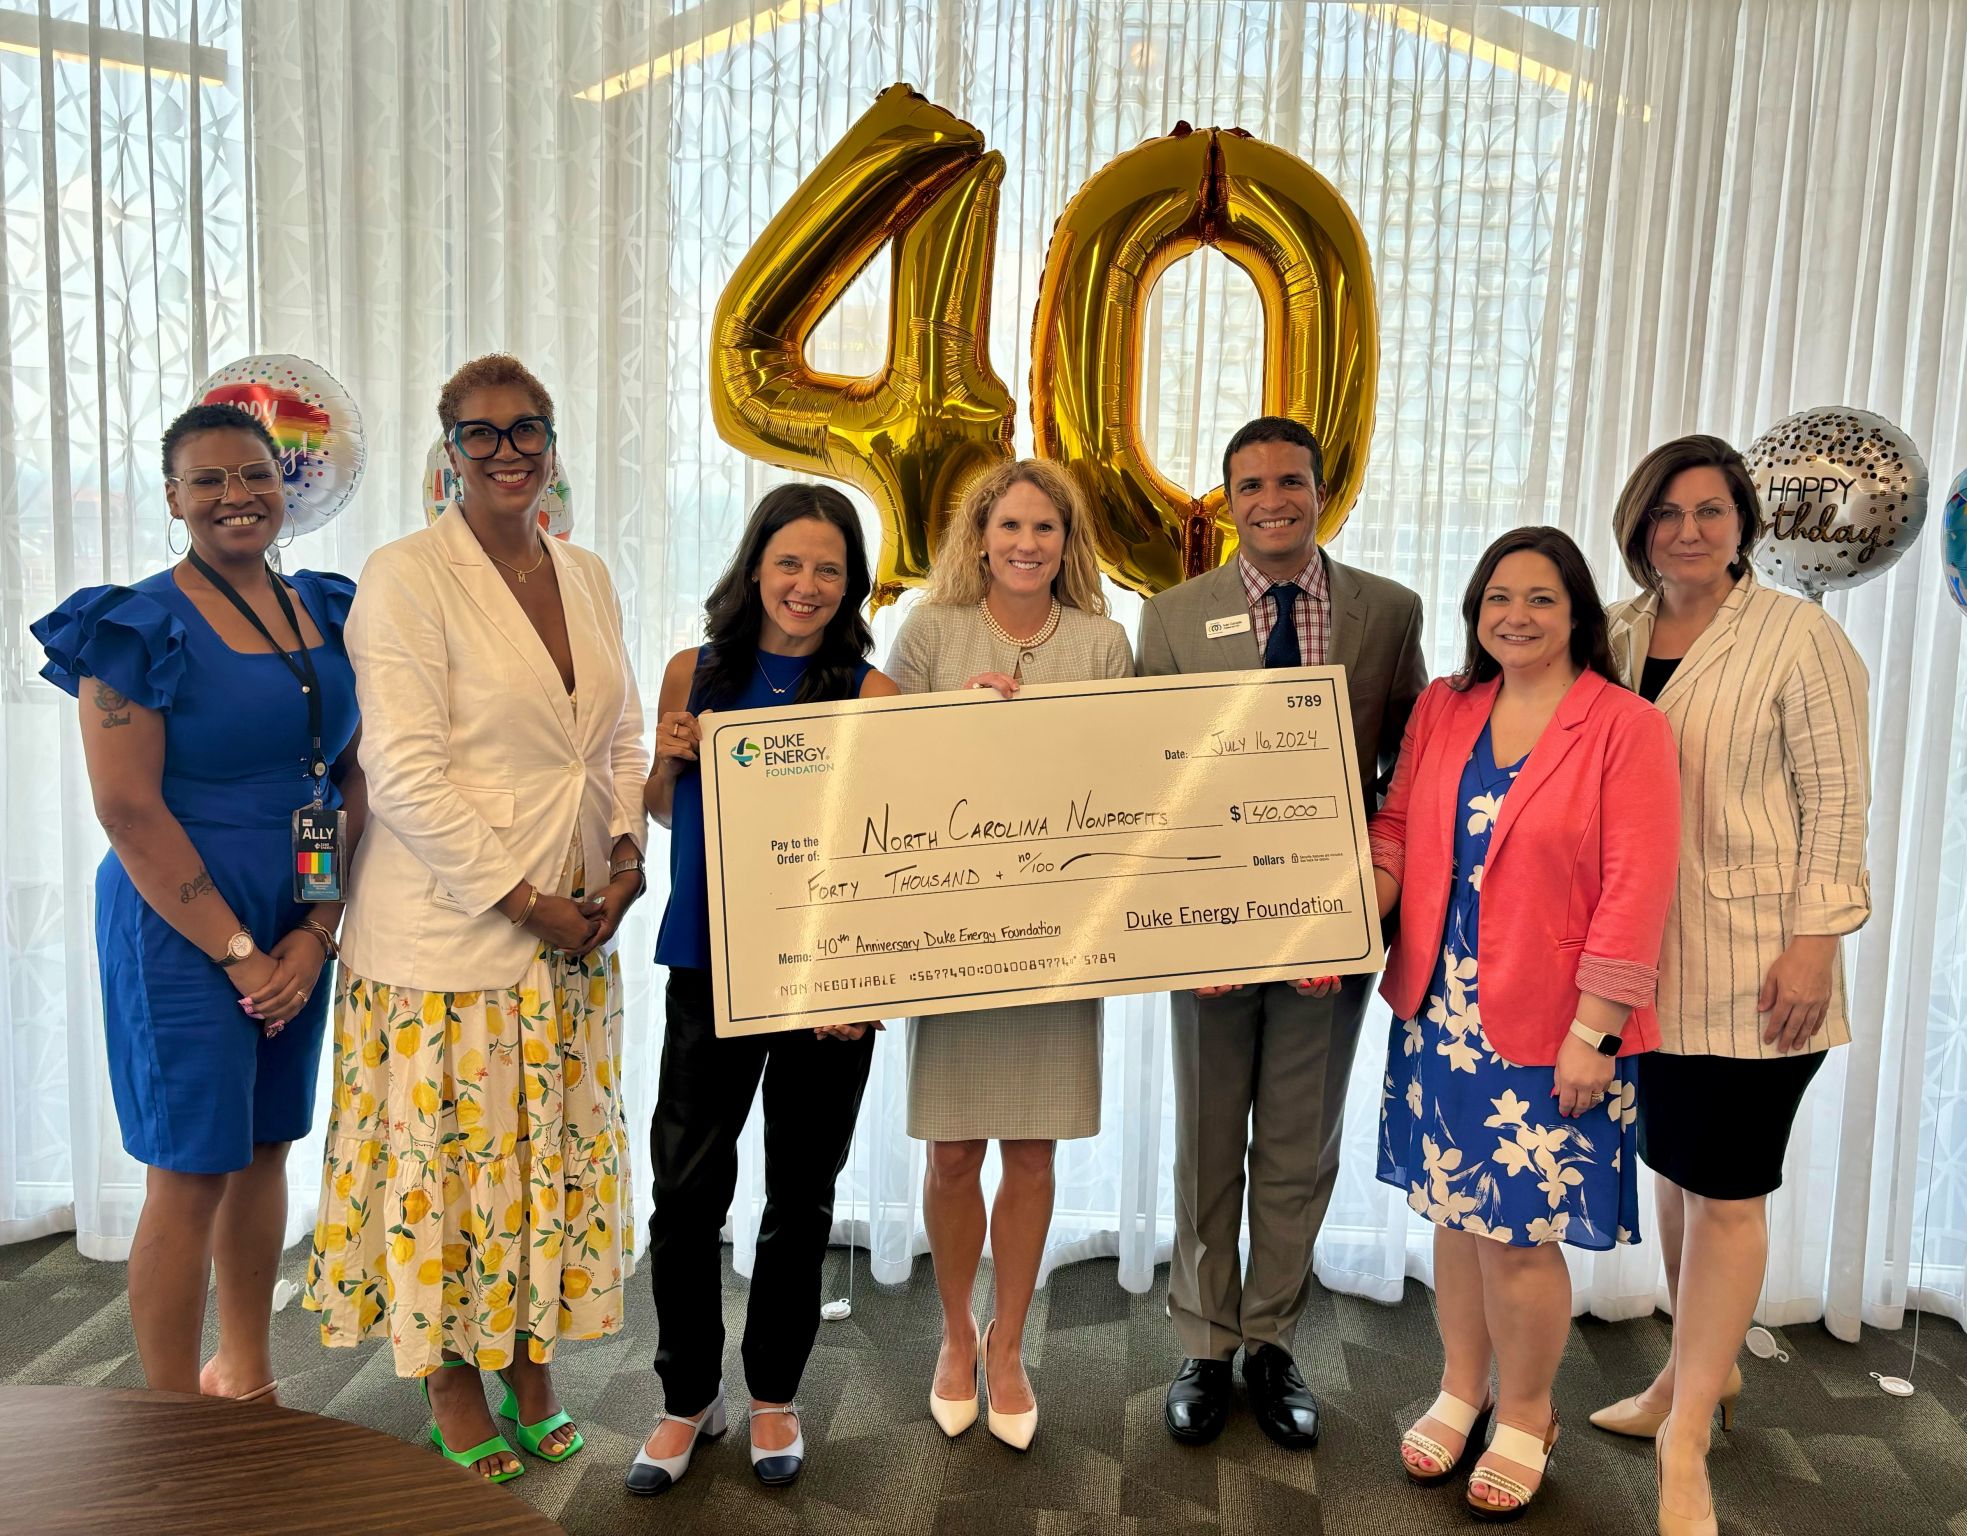 $10,000 Grant awarded to  North Carolina Center for Nonprofits, United Way of North Carolina, North Carolina Community College System Foundation, and North Carolina American Association of Blacks in Energy.